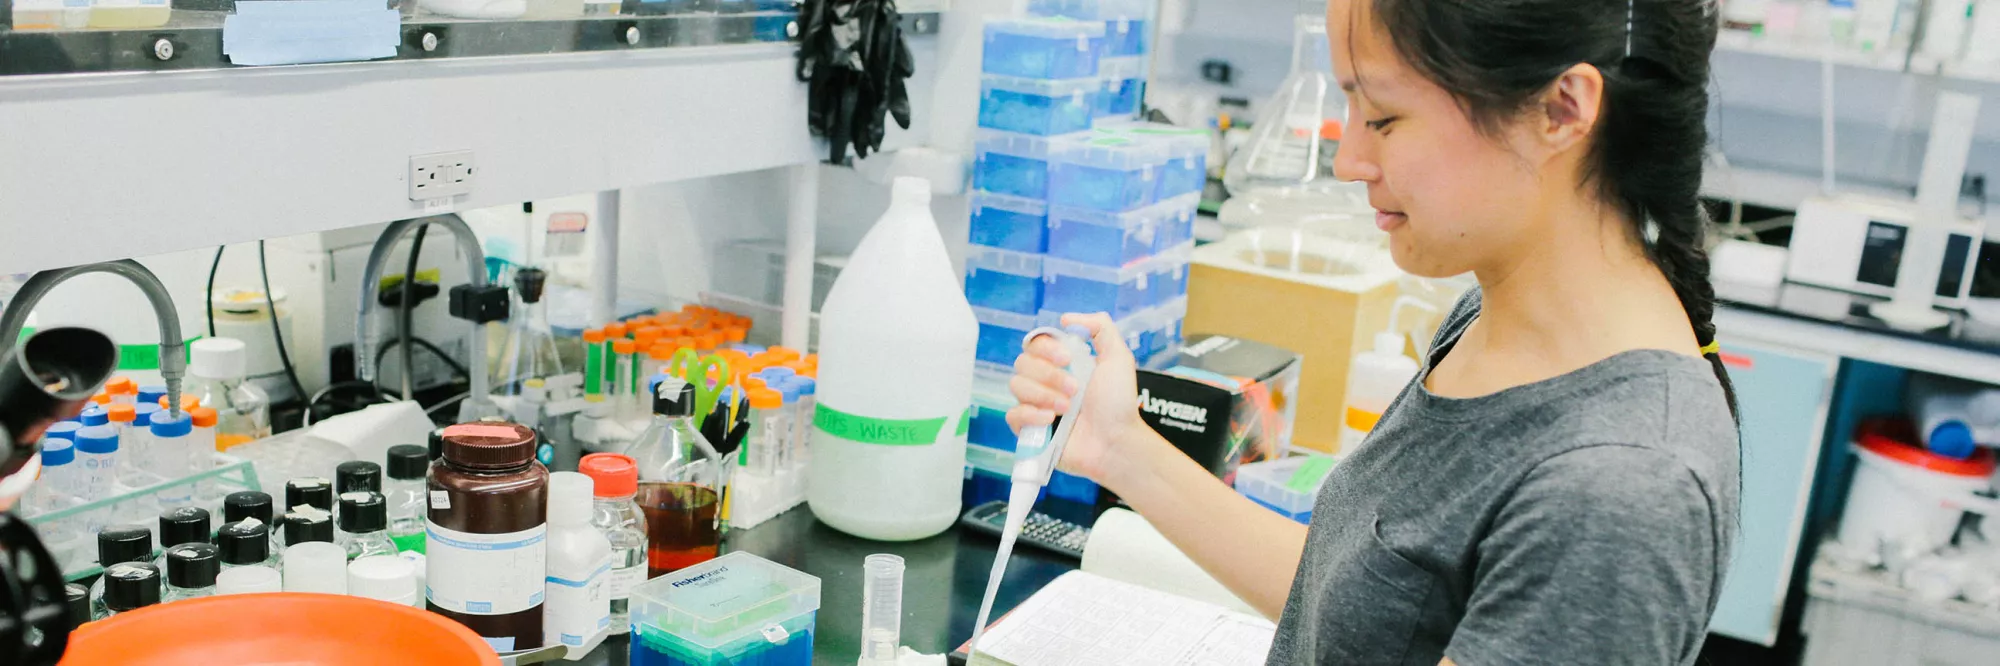 a student pipetting in a lab